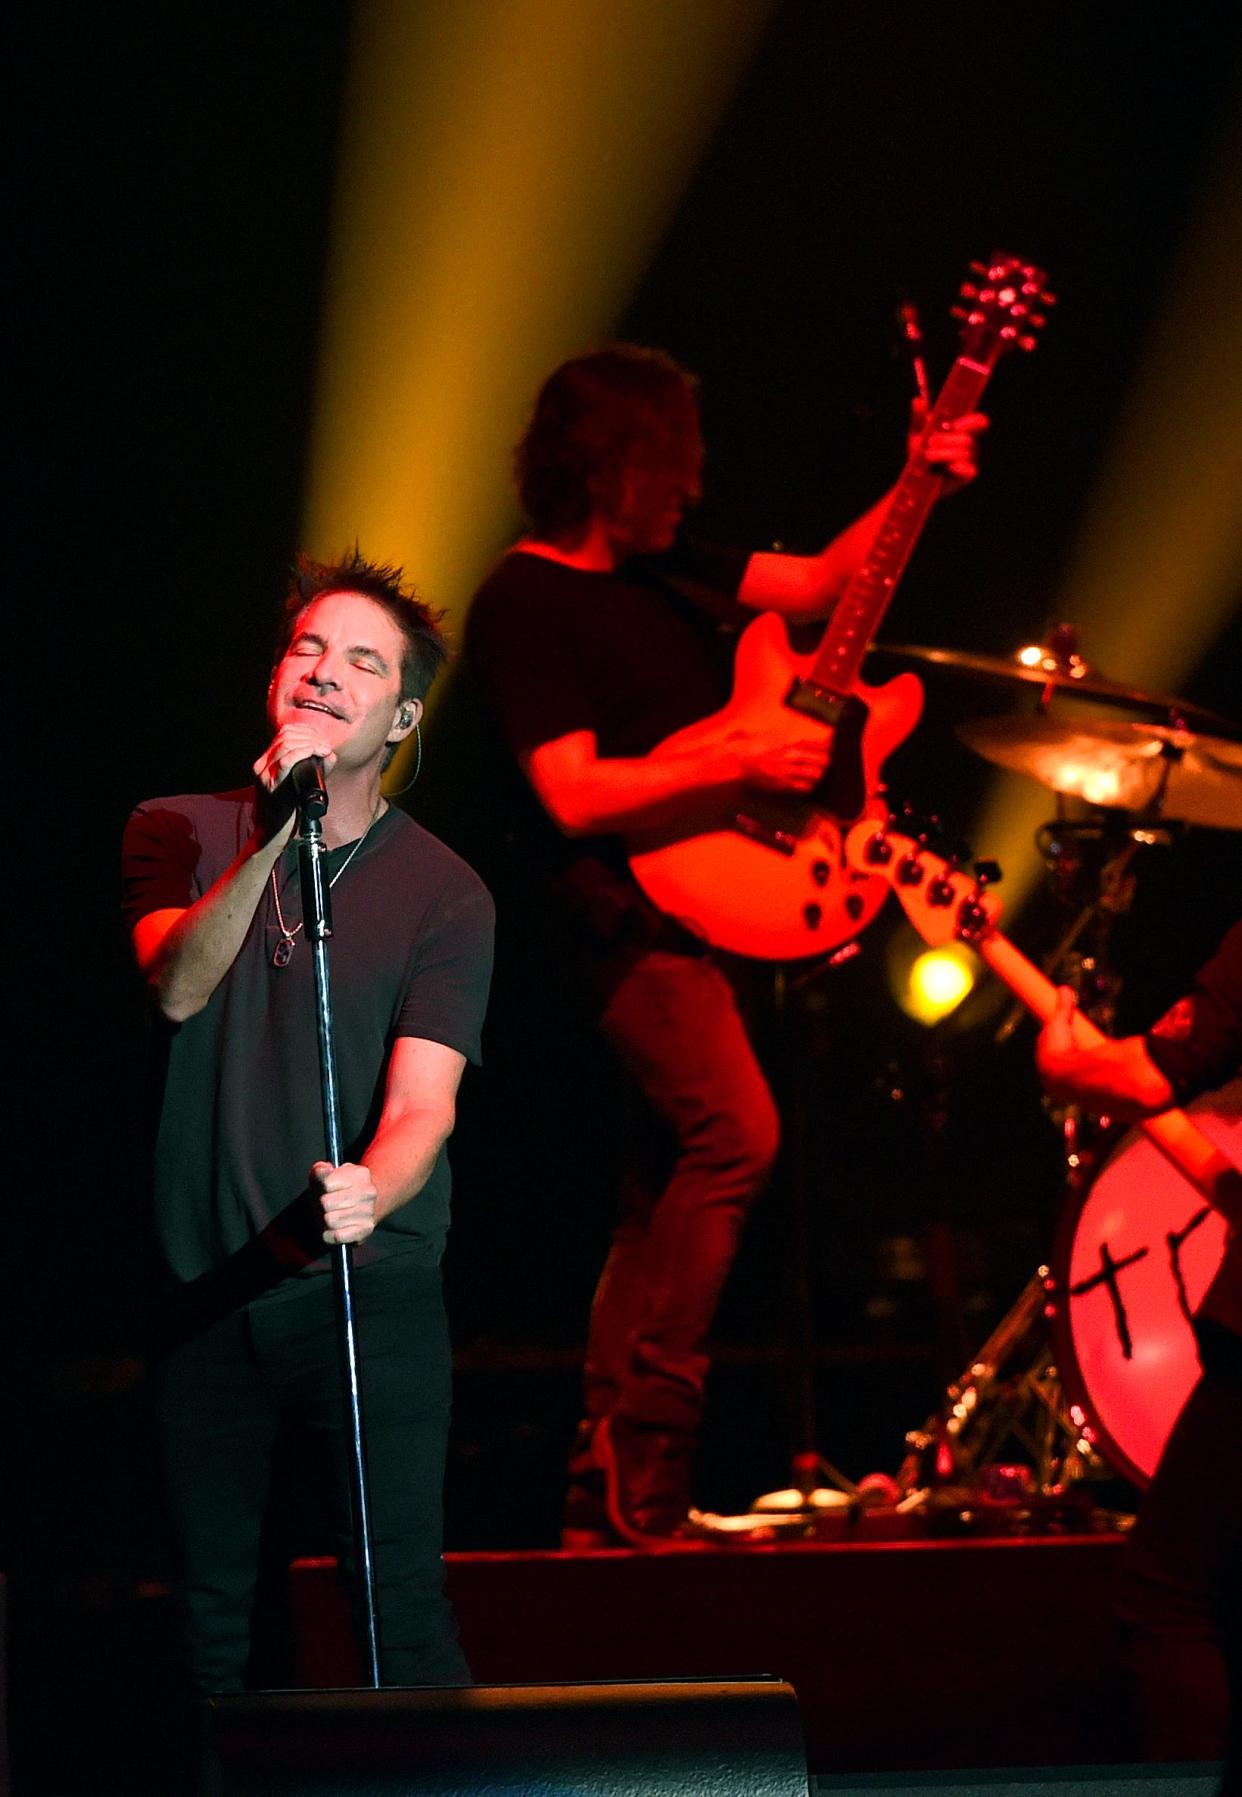 Train will perform at MidFlorida Credit Union Amphitheatre on June 25 with Jewel and Blues Traveler.